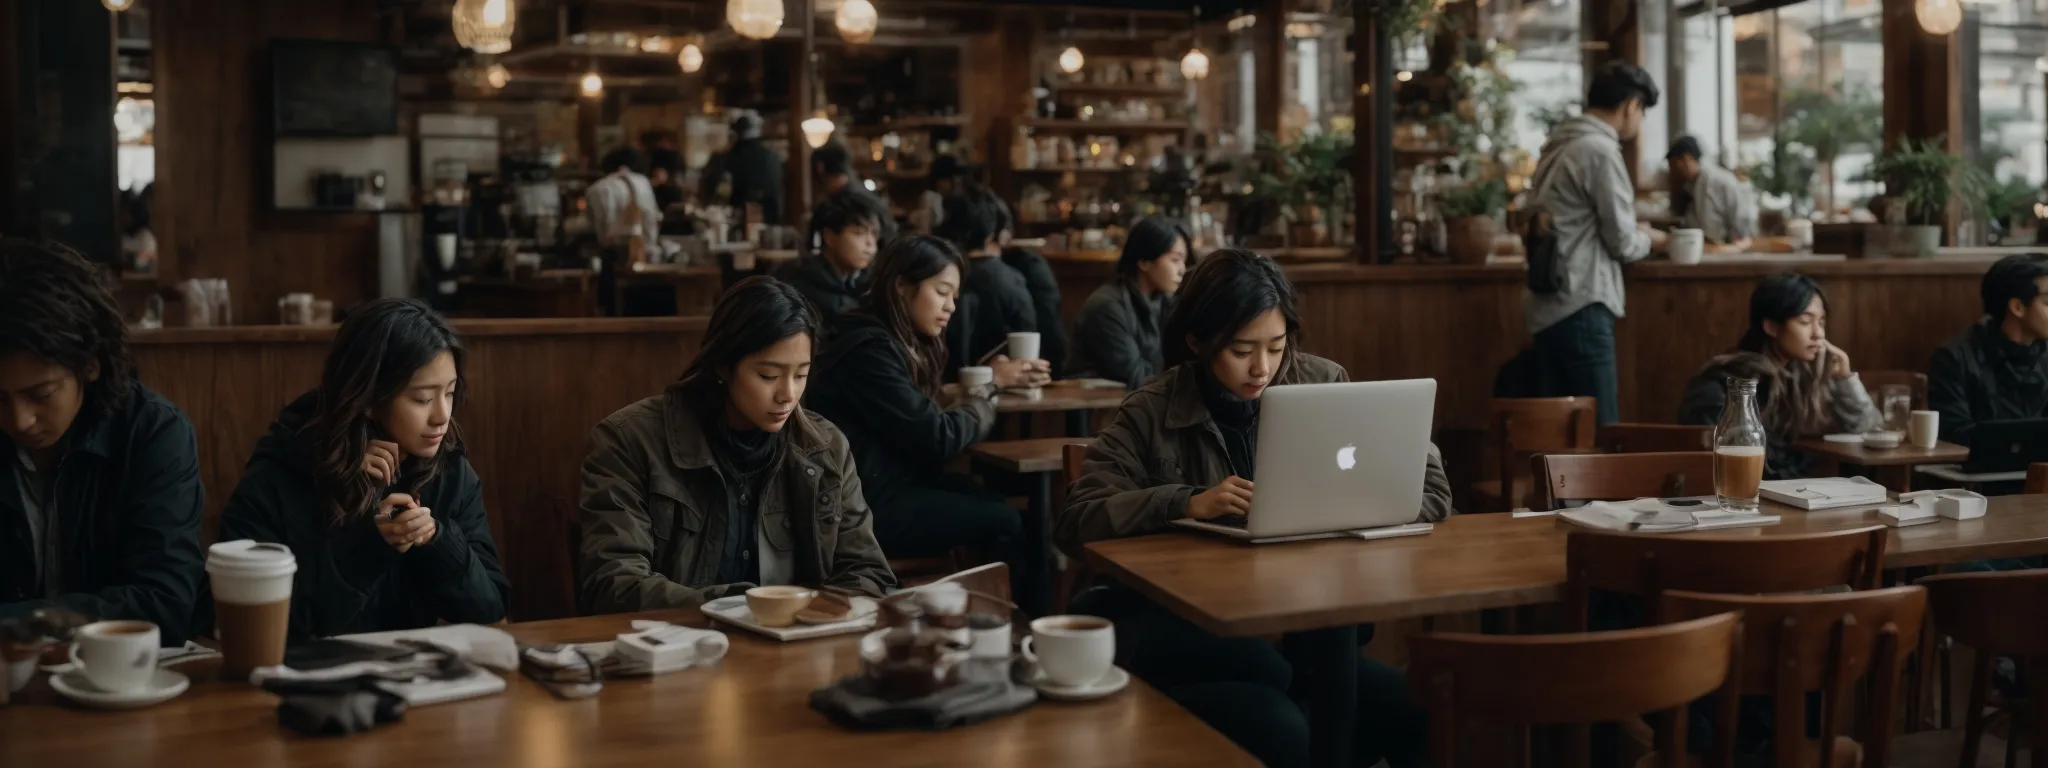 a cozy café filled with individuals intently typing on laptops and engaging in animated discussions around tables cluttered with coffee cups and notebooks.